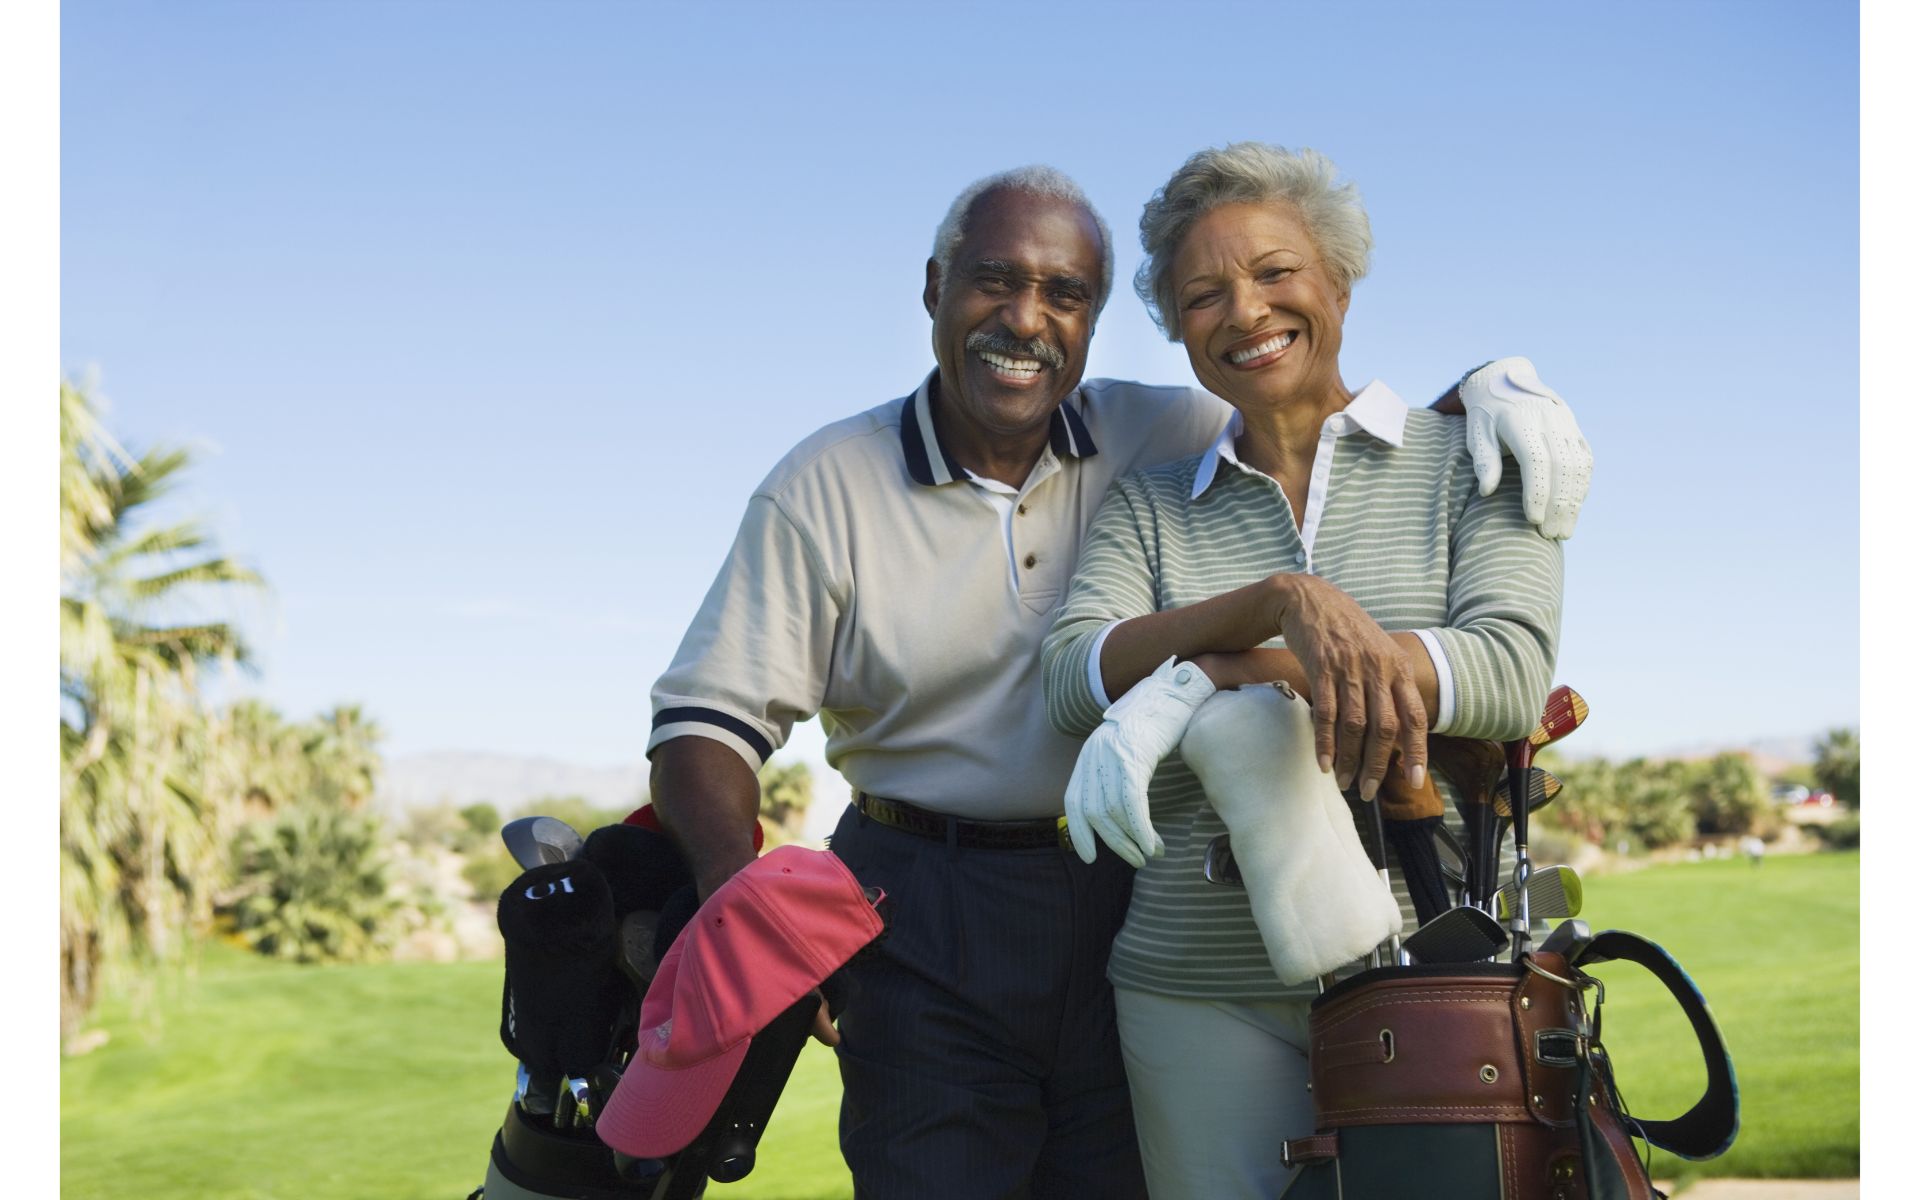 Older couple on golf course together. Article about adapting to changes in mobility.